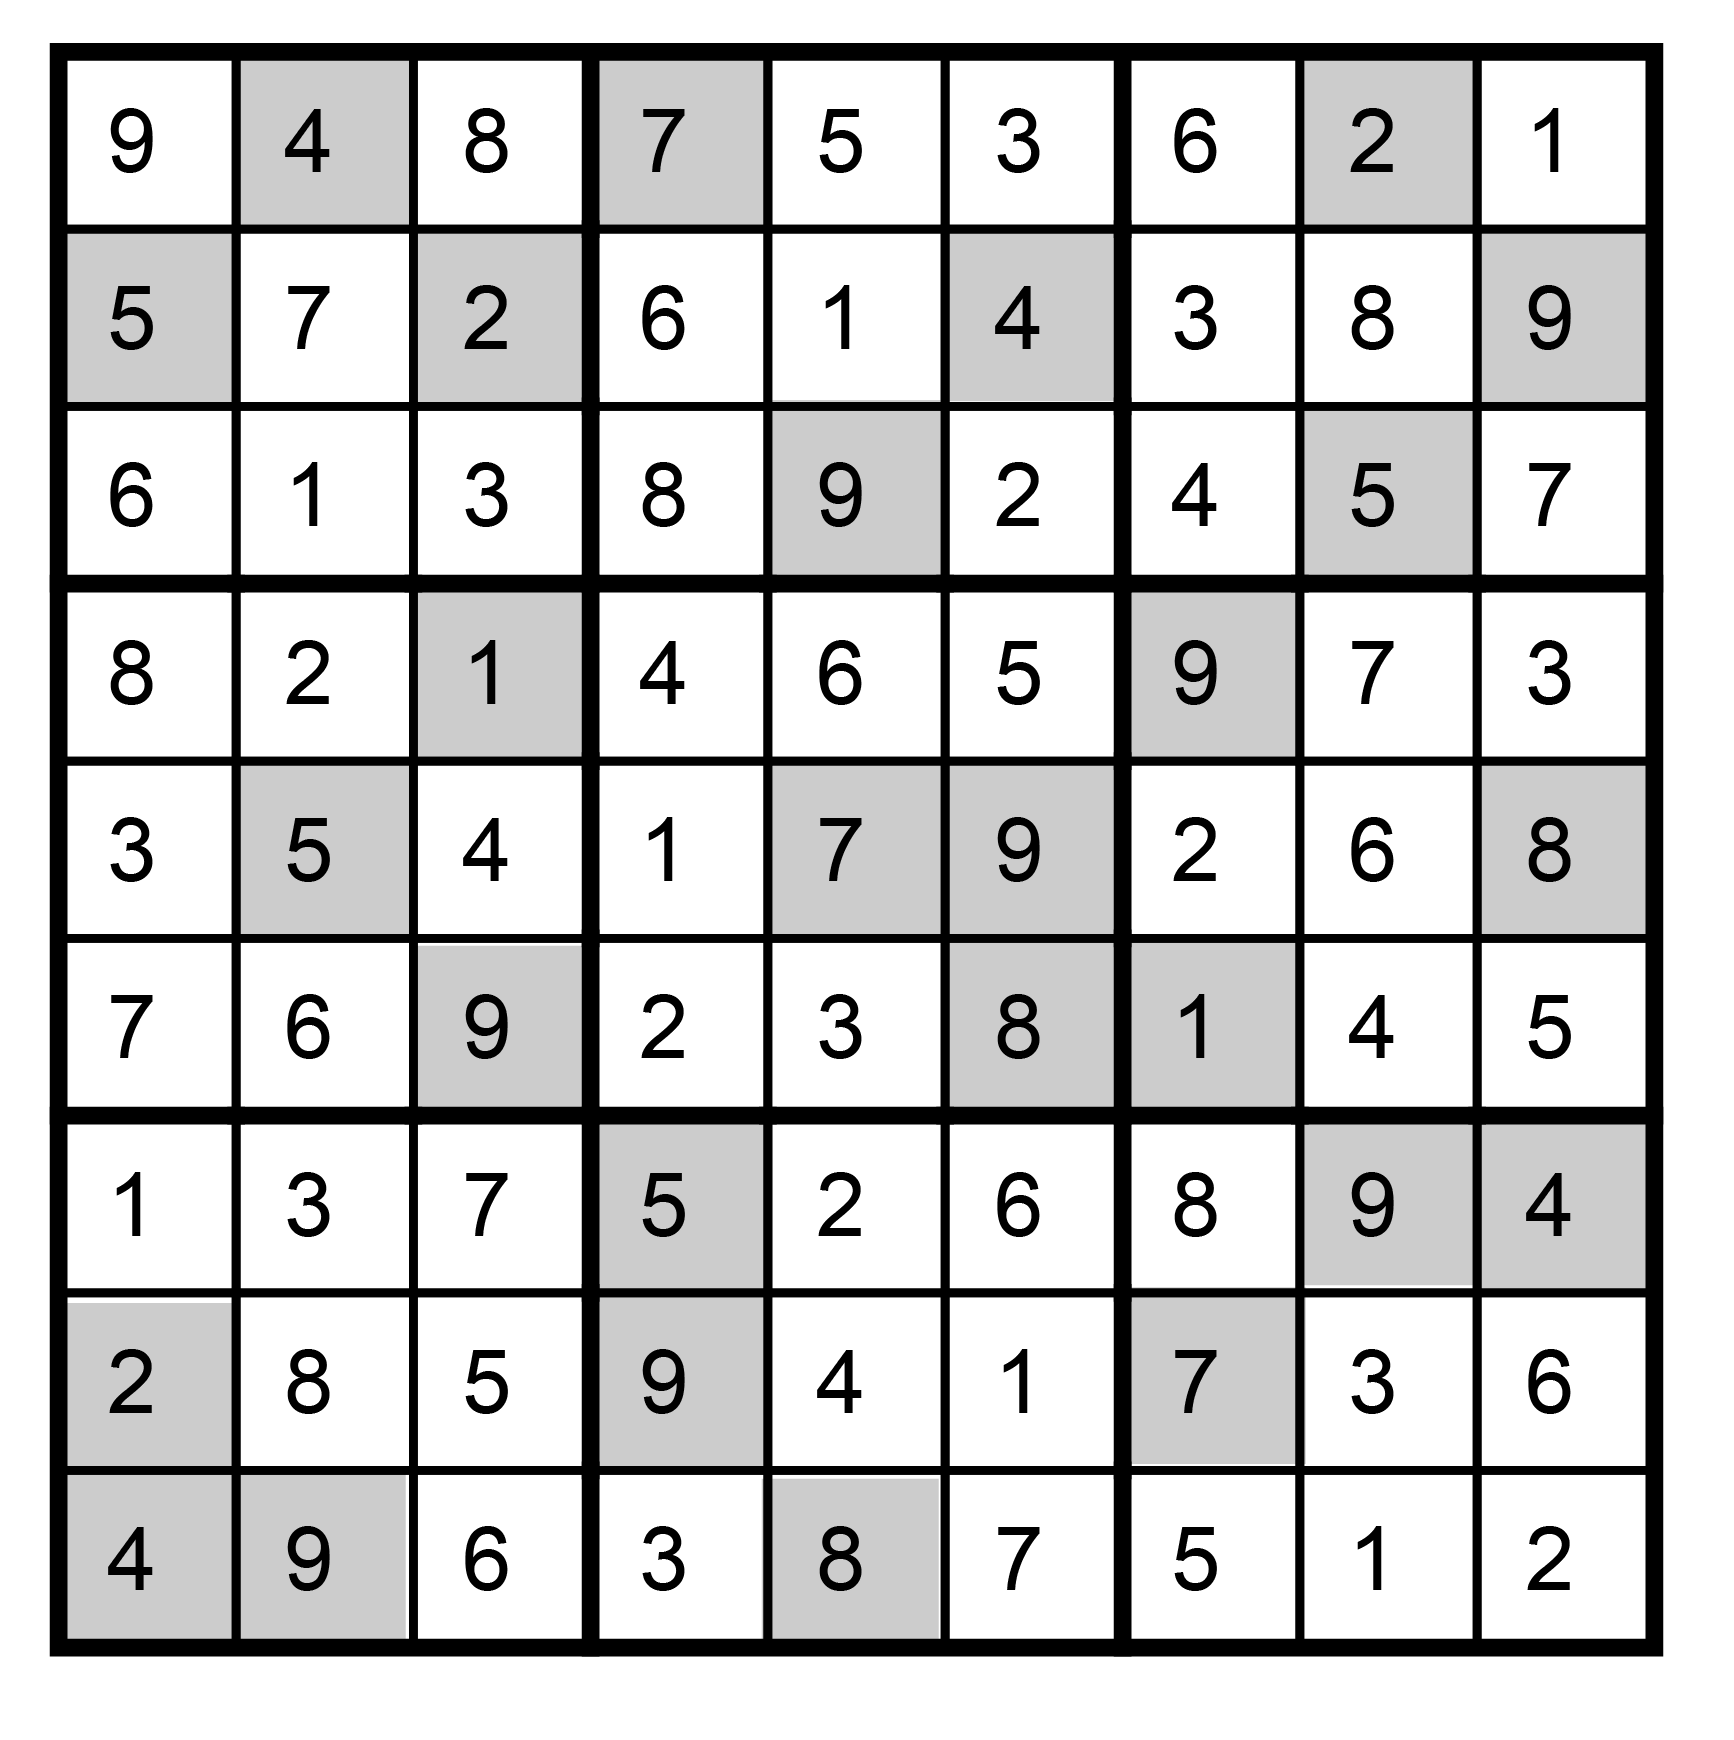 Solution for Issue #2 Sudoku Puzzle